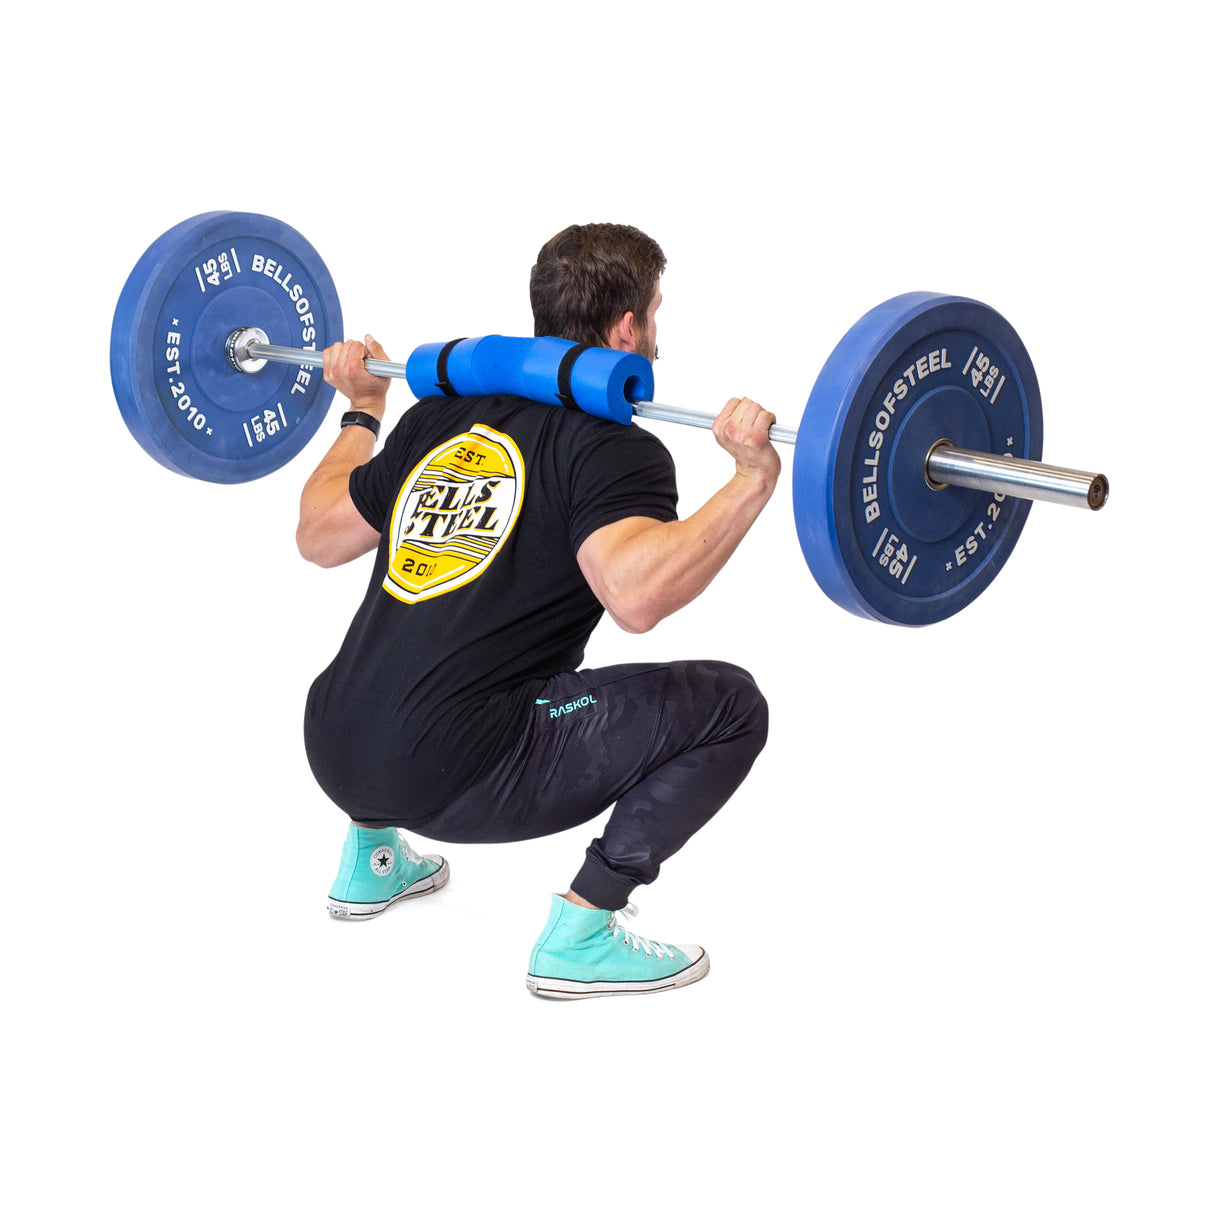 Male athlete doing squats using barbell with Barbell Pads with Straps